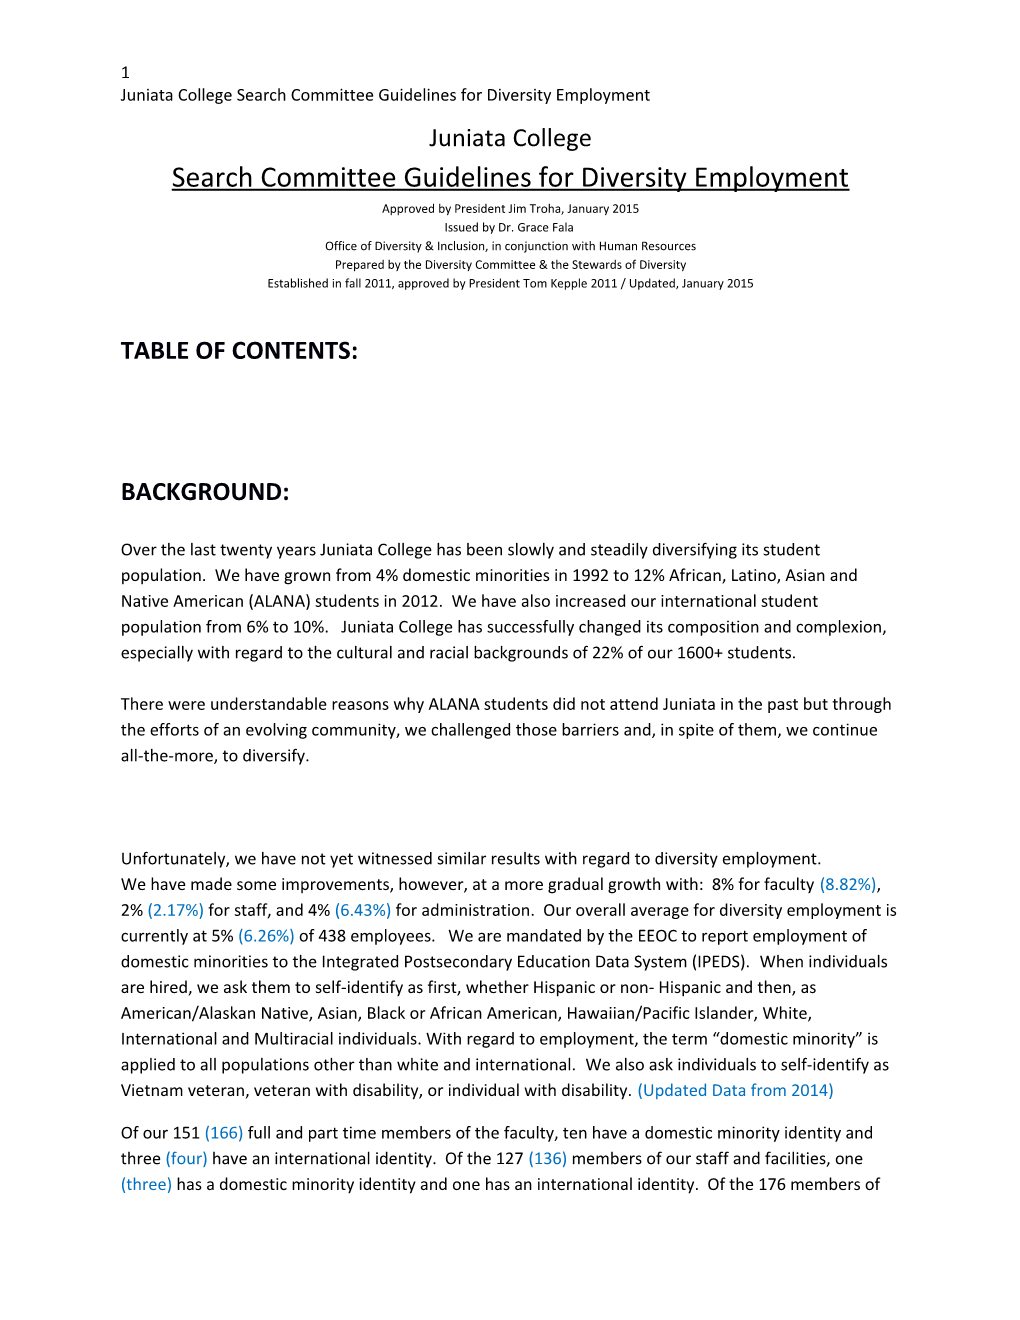 Juniata College Search Committee Guidelines for Diversity Employment